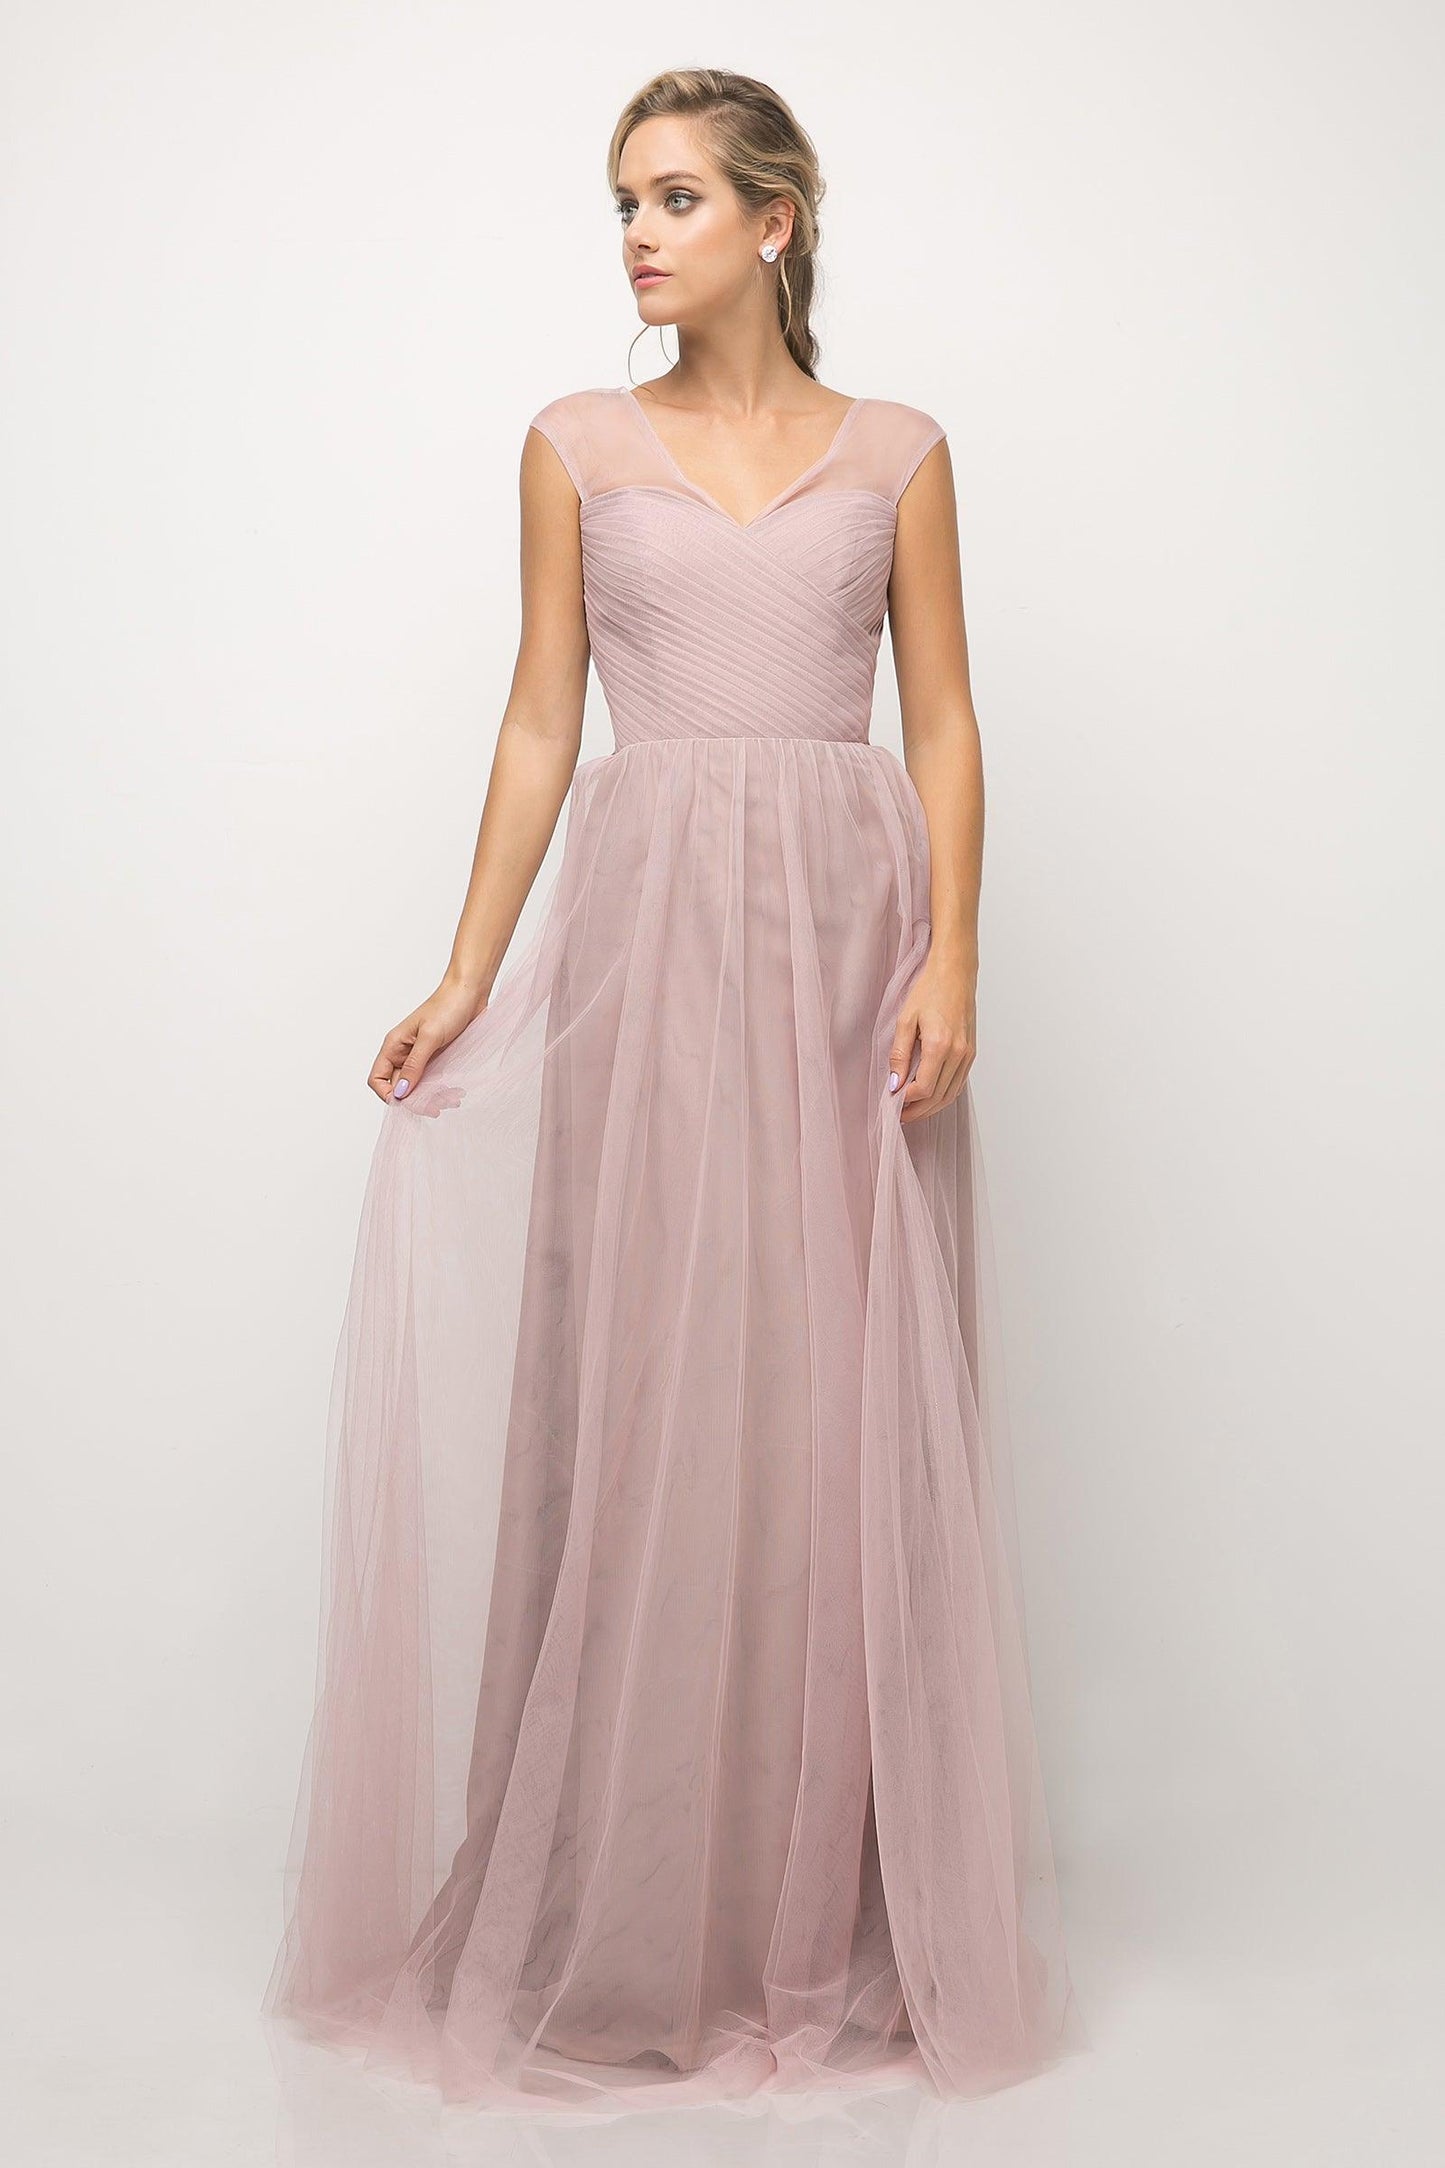 Long V Neck Prom Dress Bridesmaid Gown - The Dress Outlet